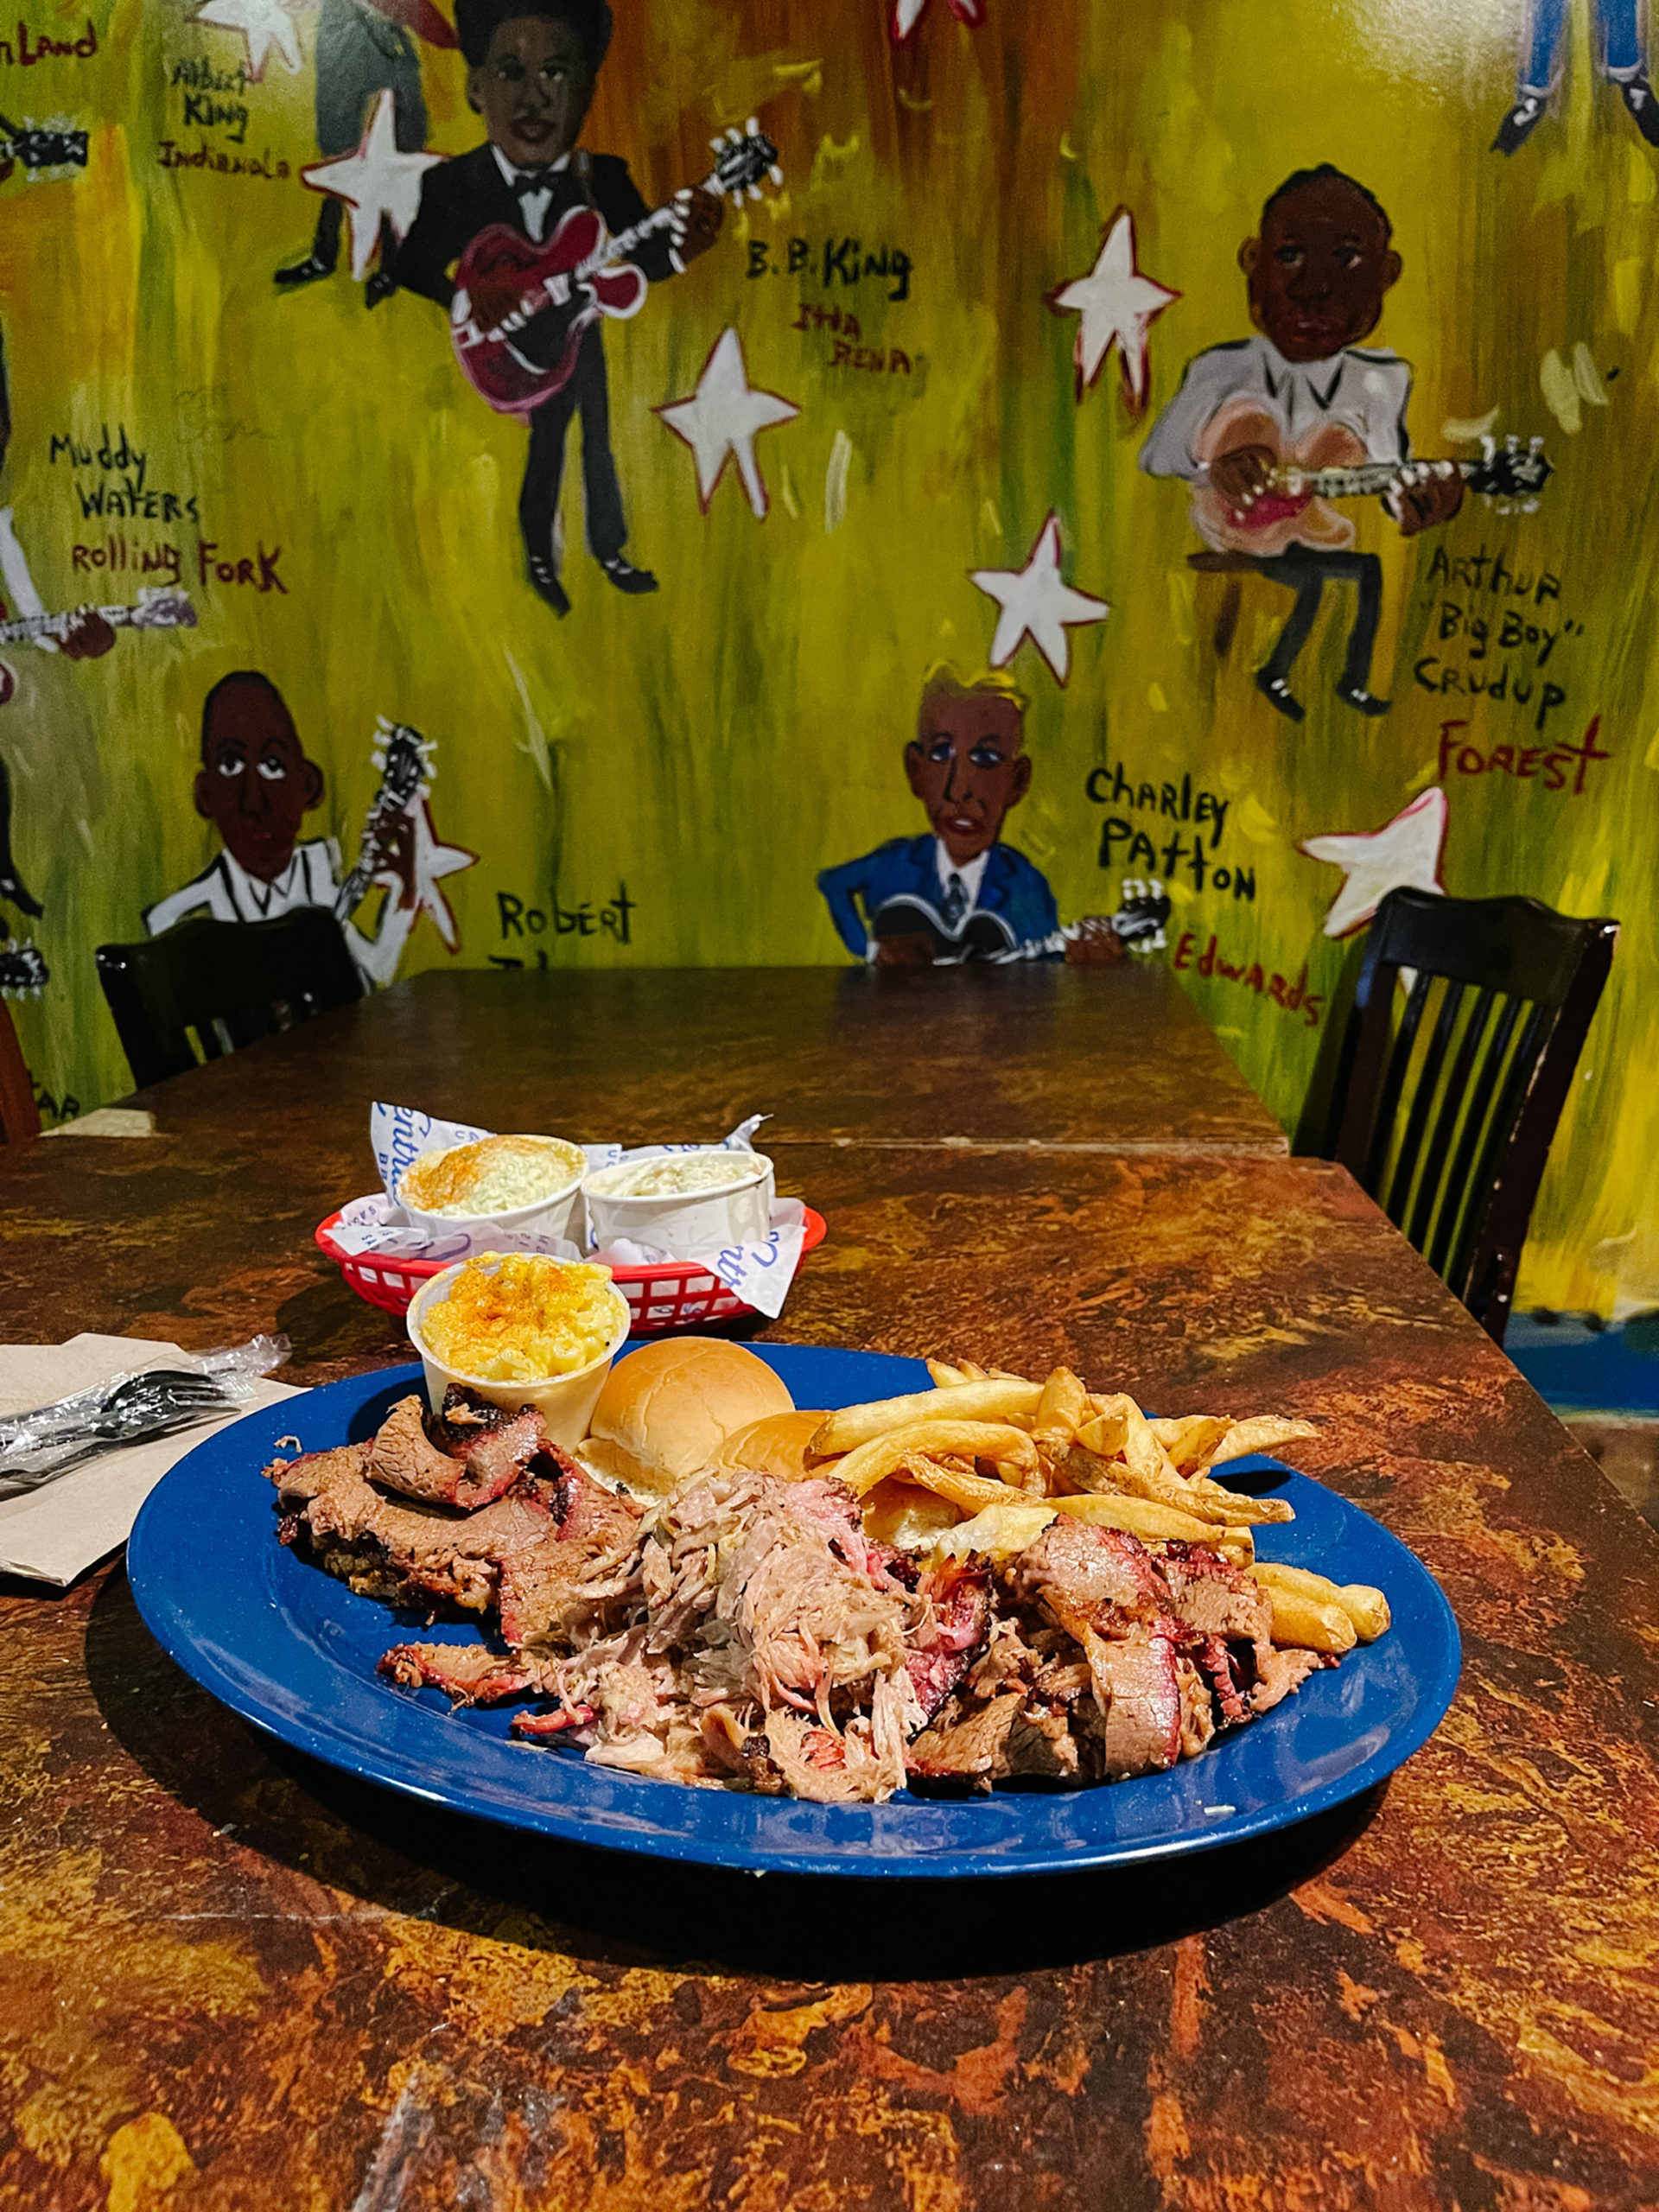 Central BBQ in Memphis, TN | Finding Beautiful Truth